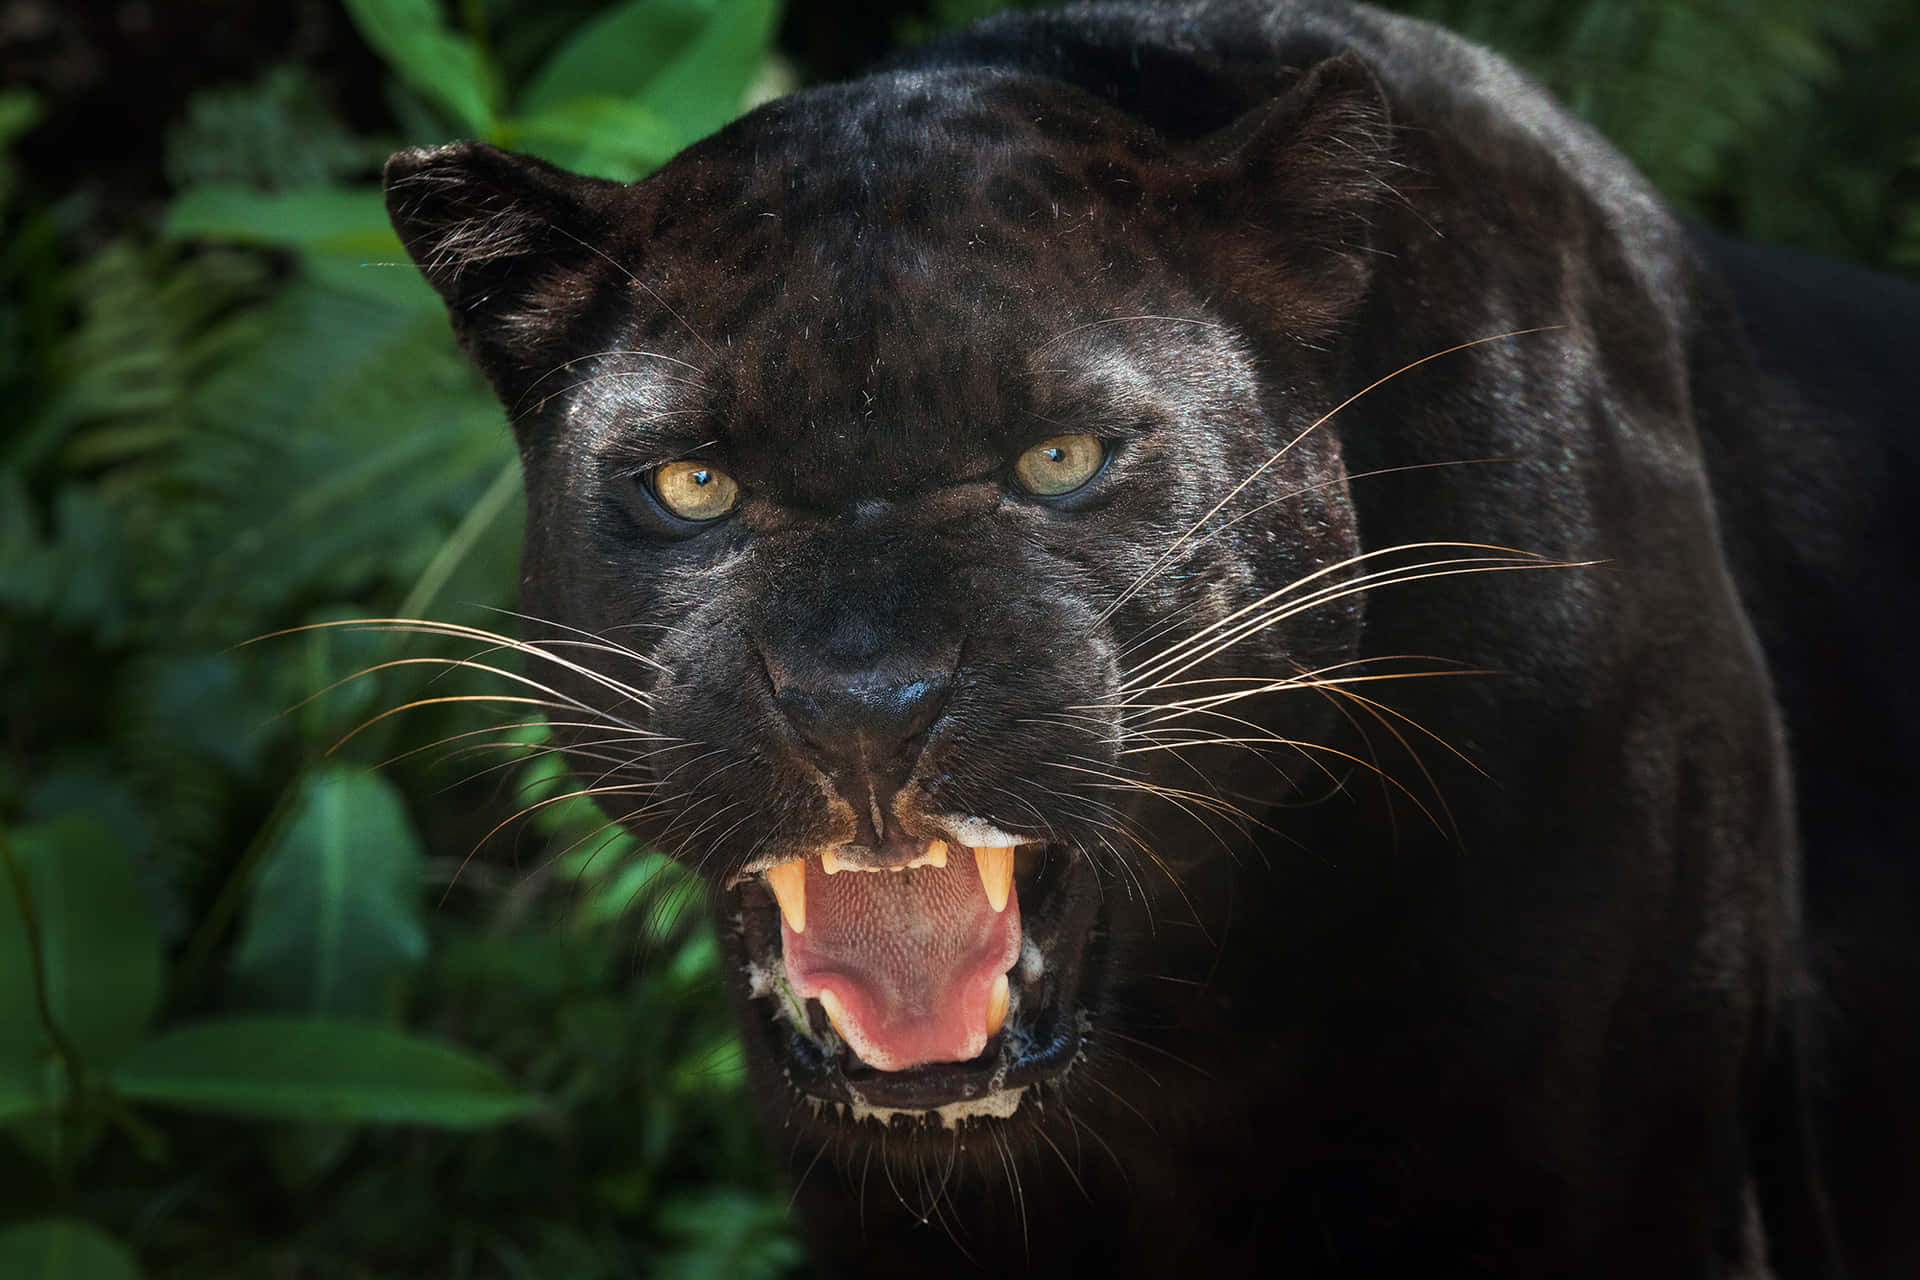 A Majestic Black Panther in a Lush Green Forest